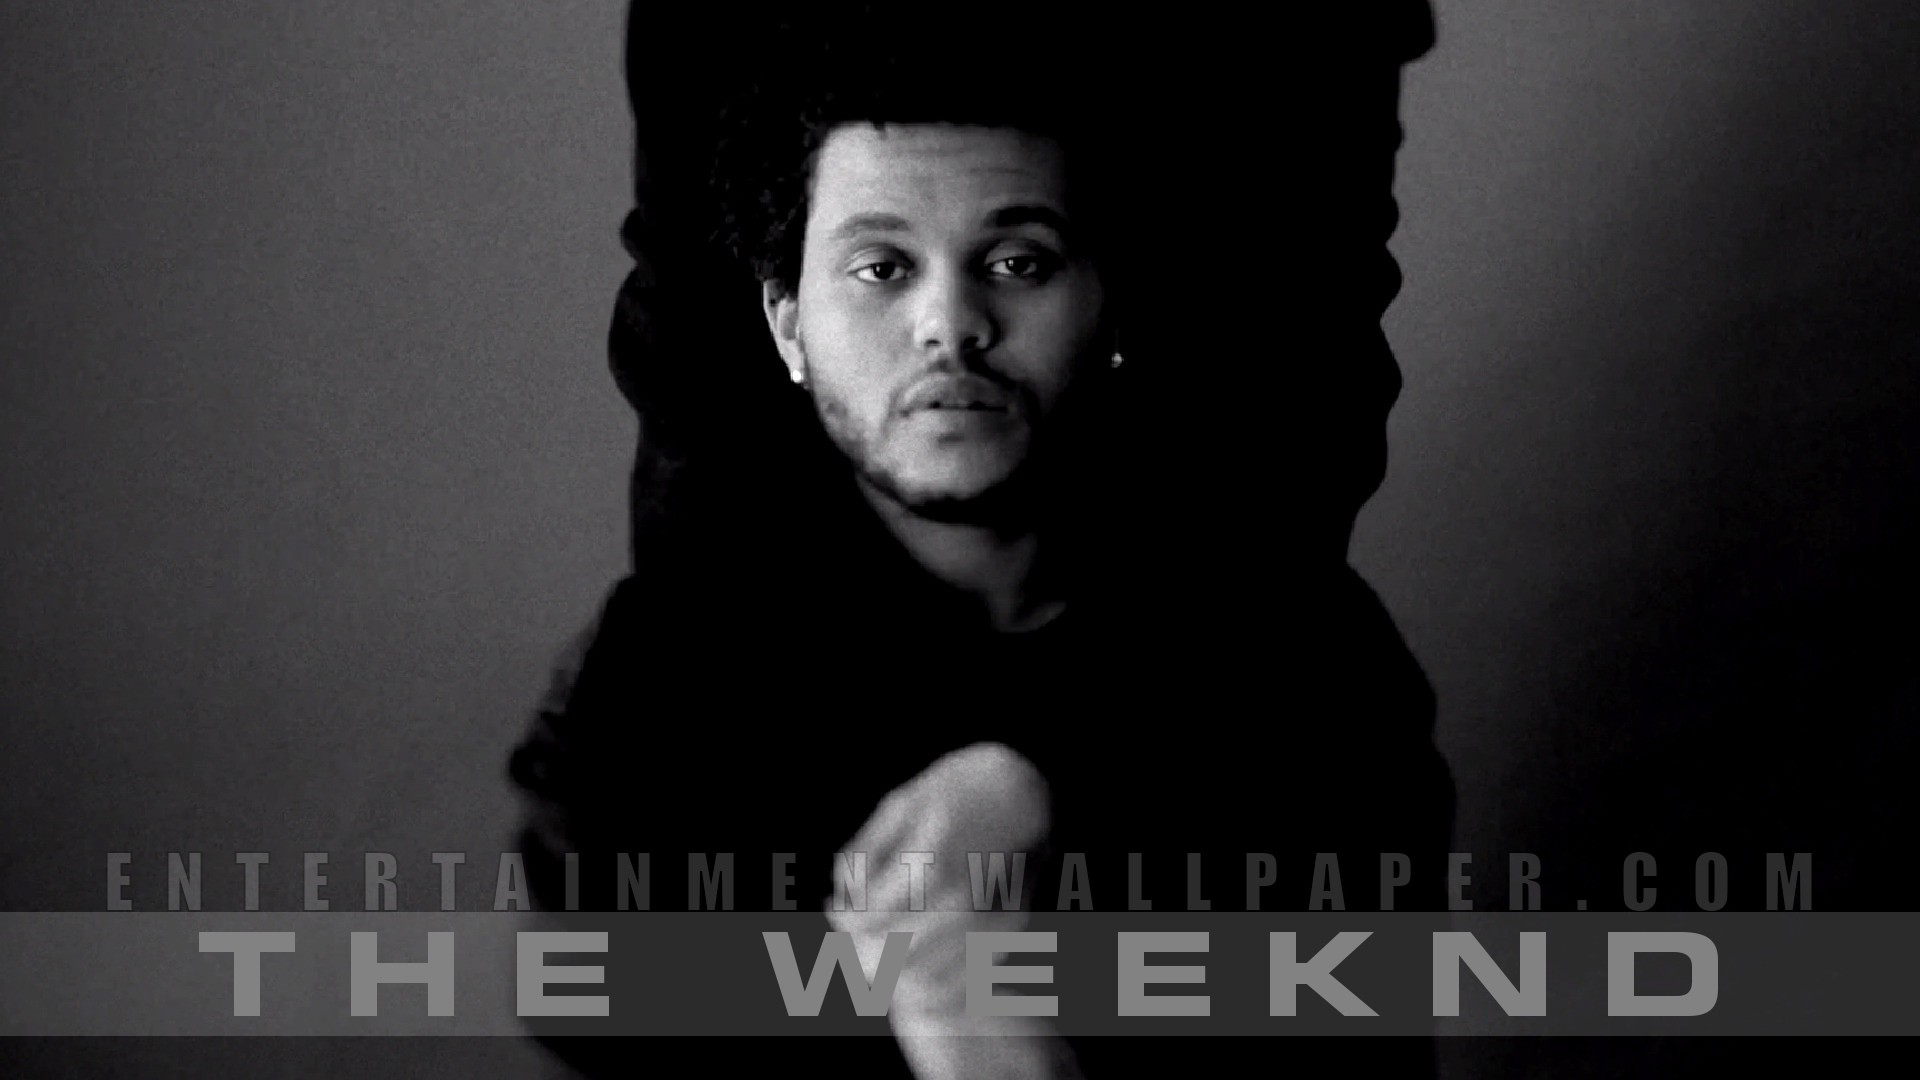 1920x1080 The Weeknd Wallpaper - Original size, download now.